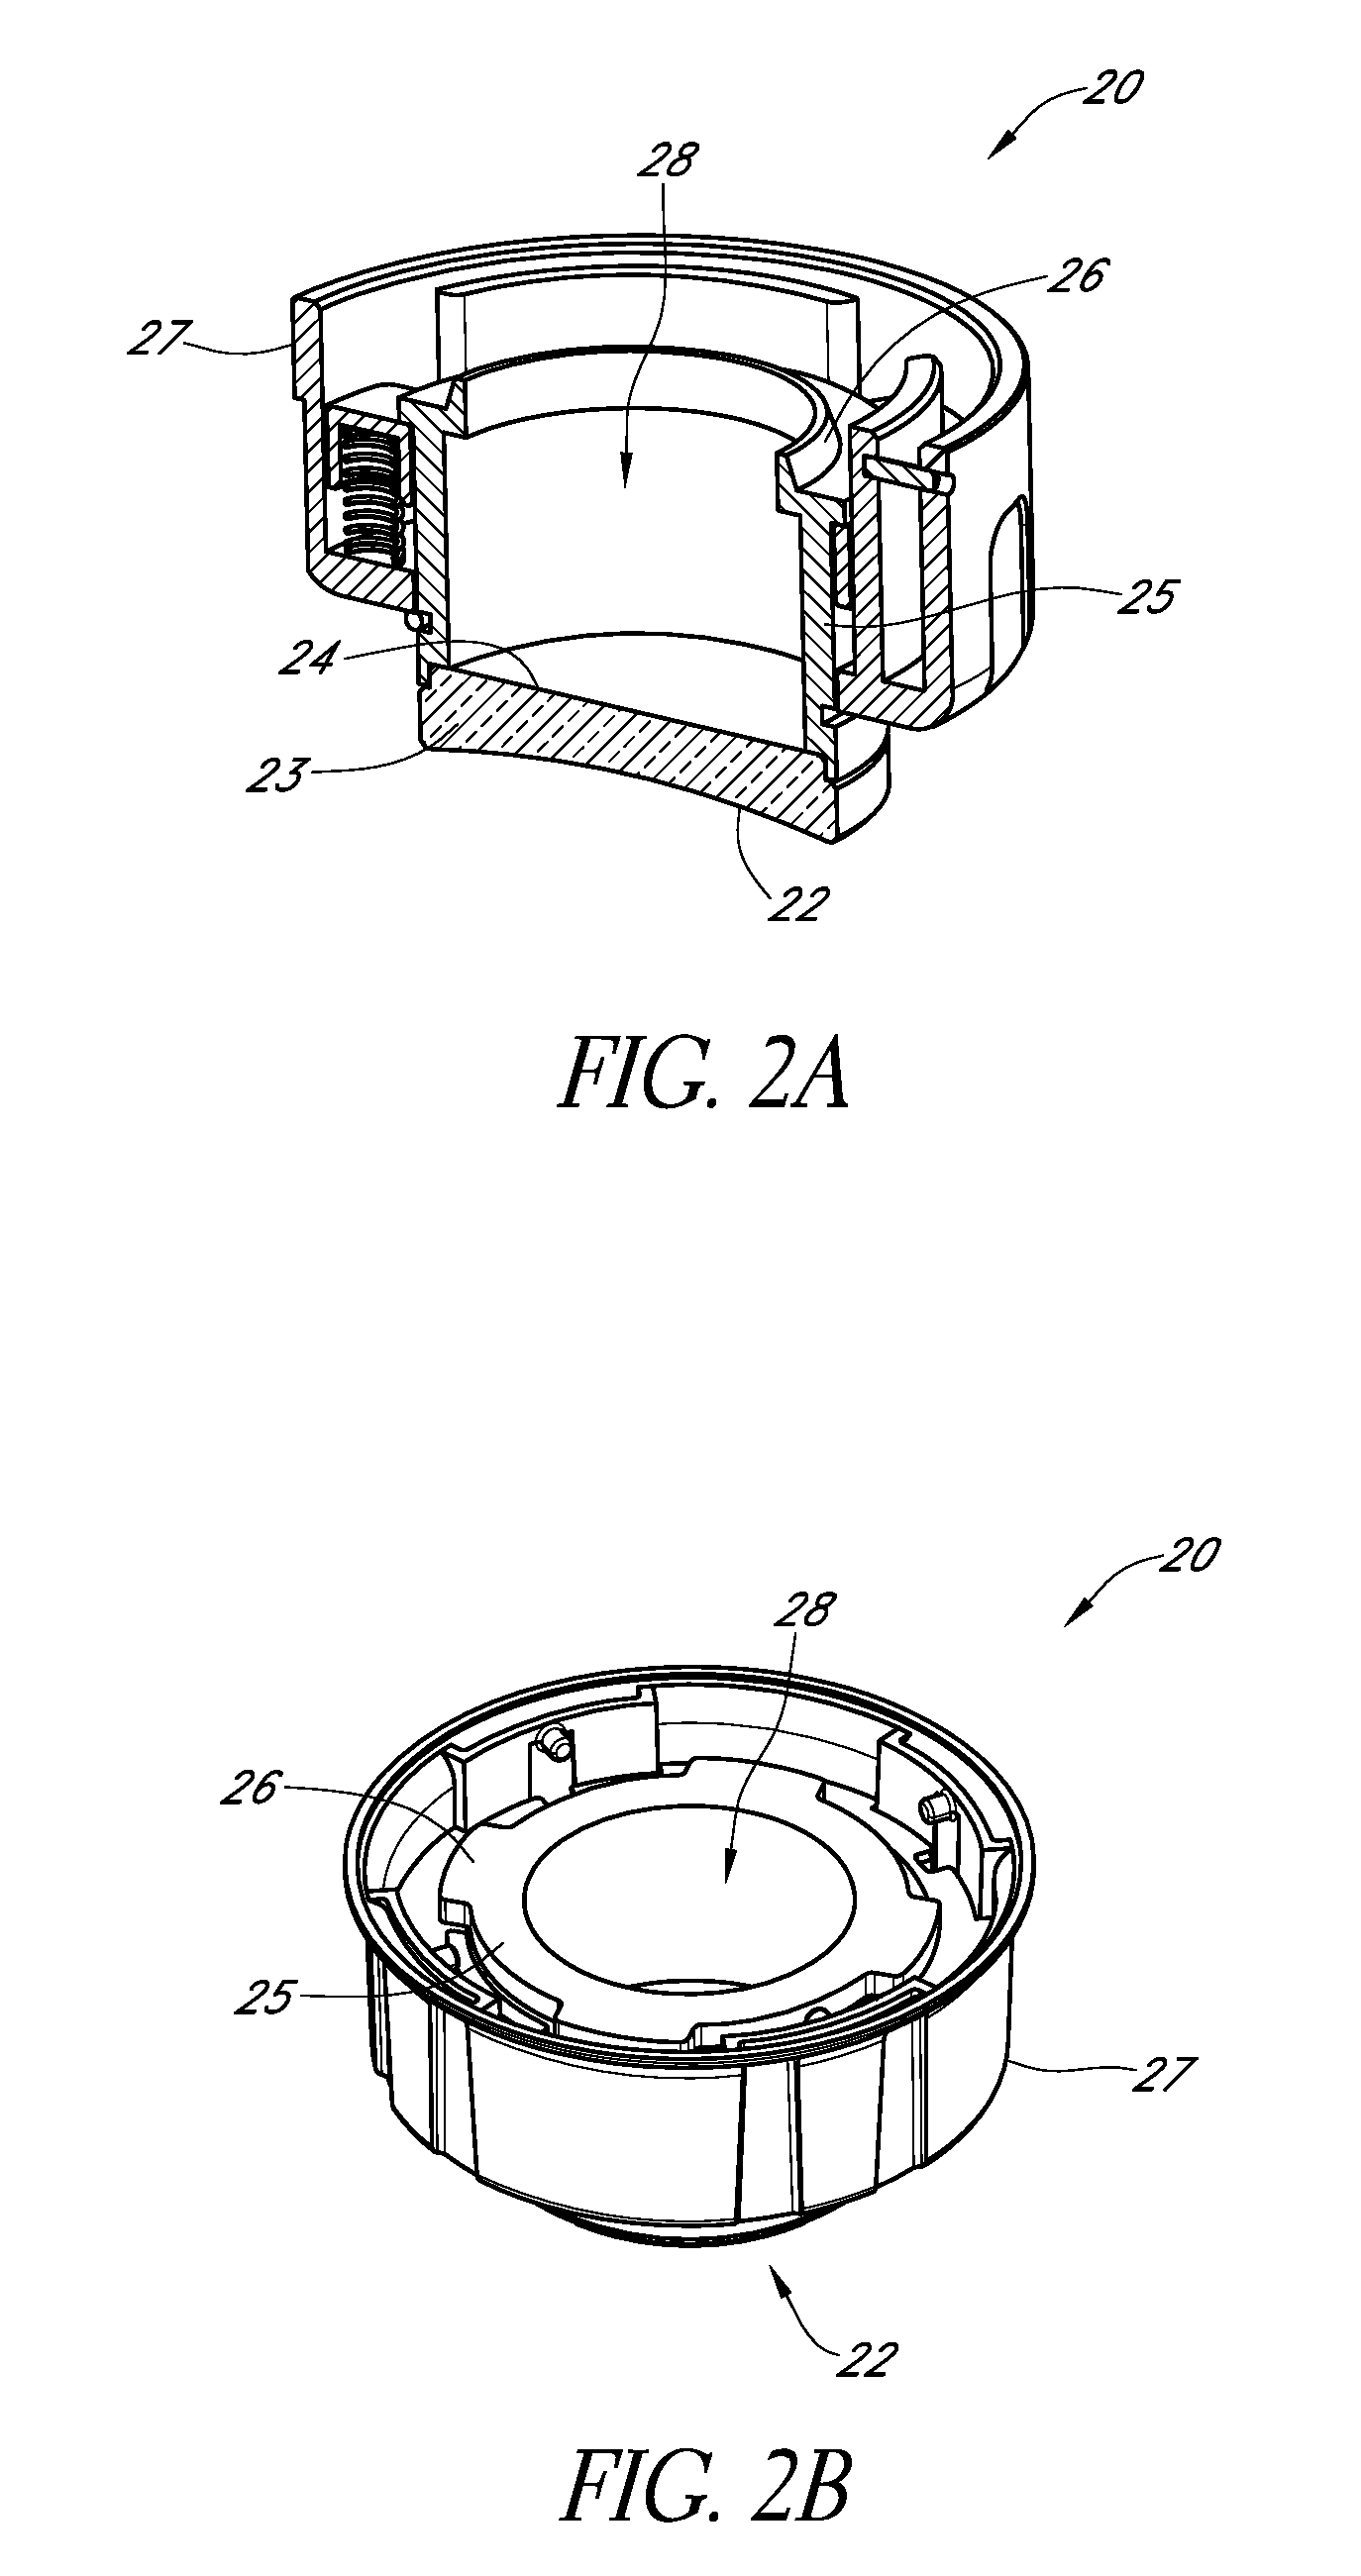 Apparatus and method for indicating treatment site locations for phototherapy to the brain